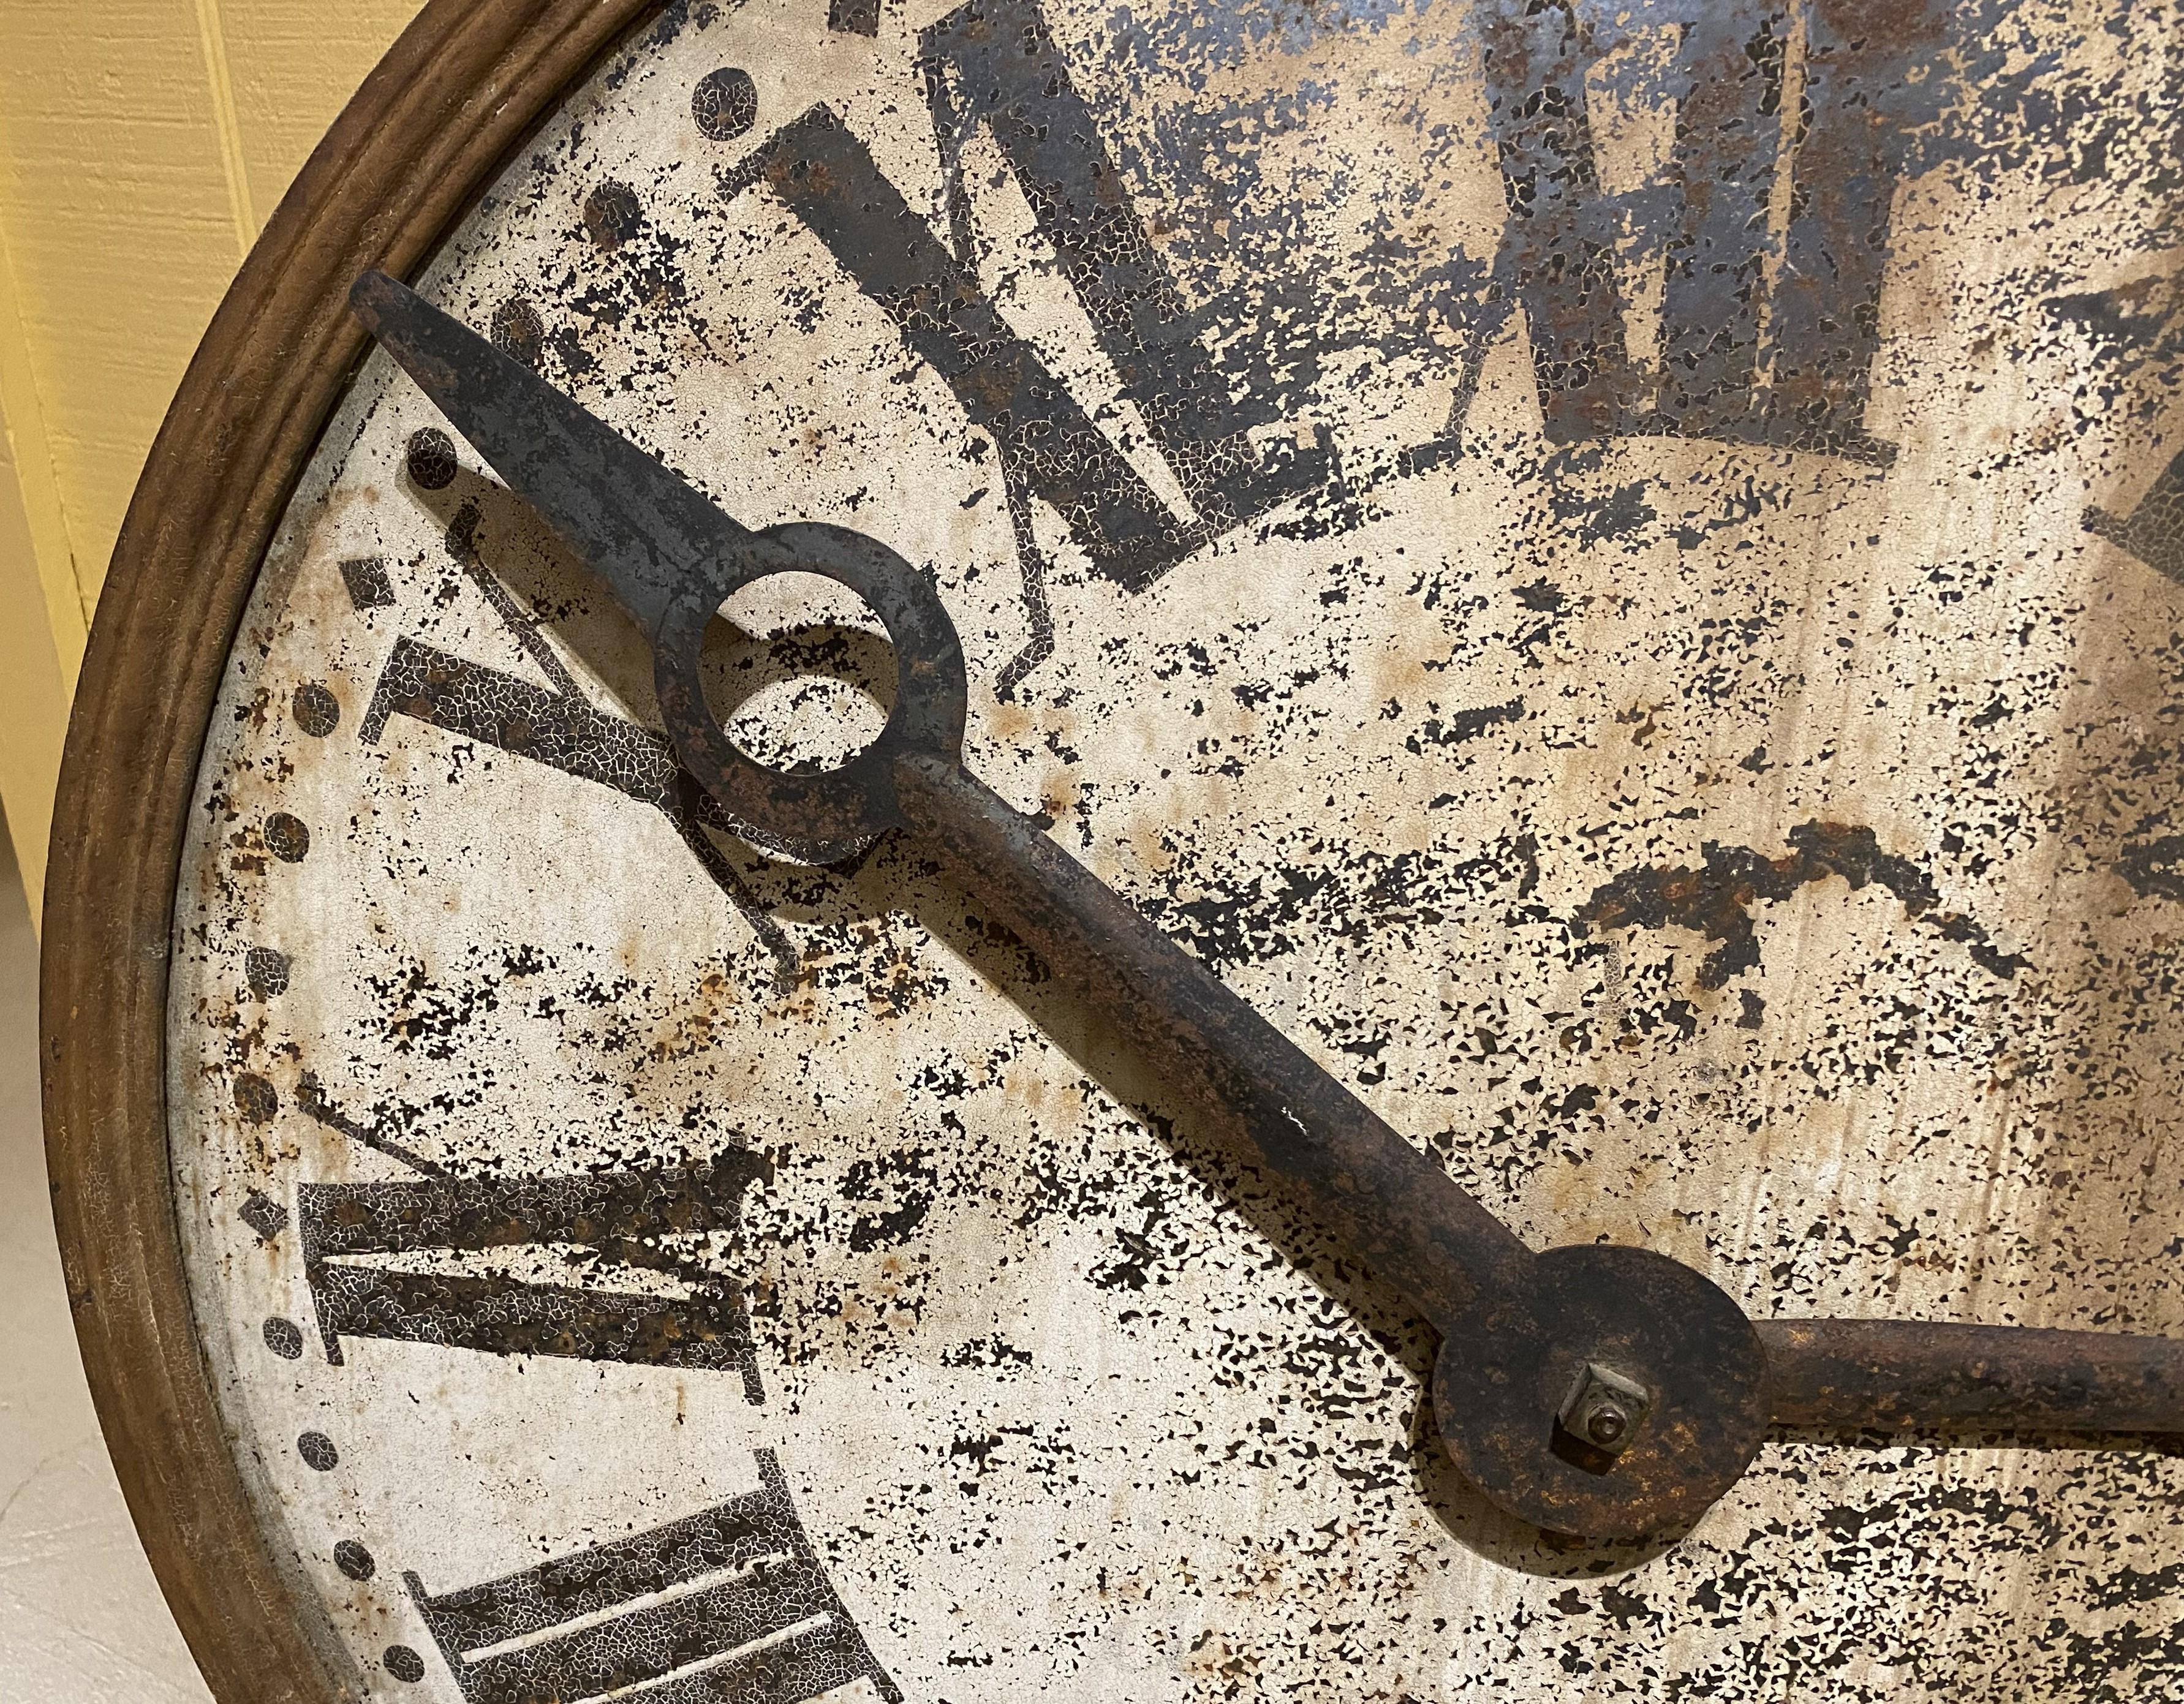 A wonderful example of an iron clock dial with hands, painted Roman numerals, and motion works, as well as the original counterweight. Probably American in origin, from a tower or building pediment, dating to the 19th century, in good overall